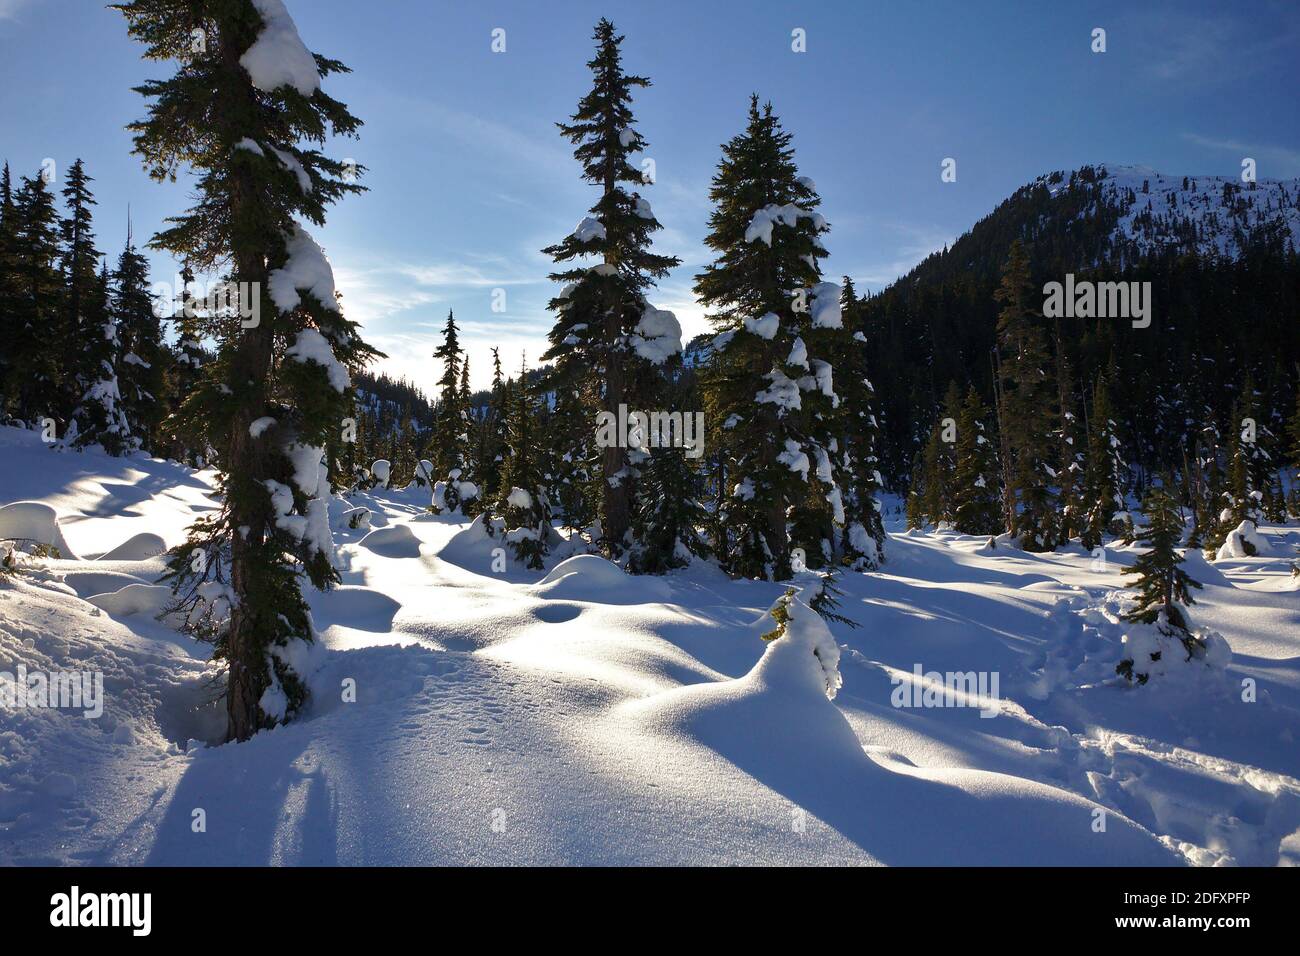 Winter landscape, trees in mountains covered with fresh snow, Rainbow Lake, Whistler, British Columbia, Canada Stock Photo